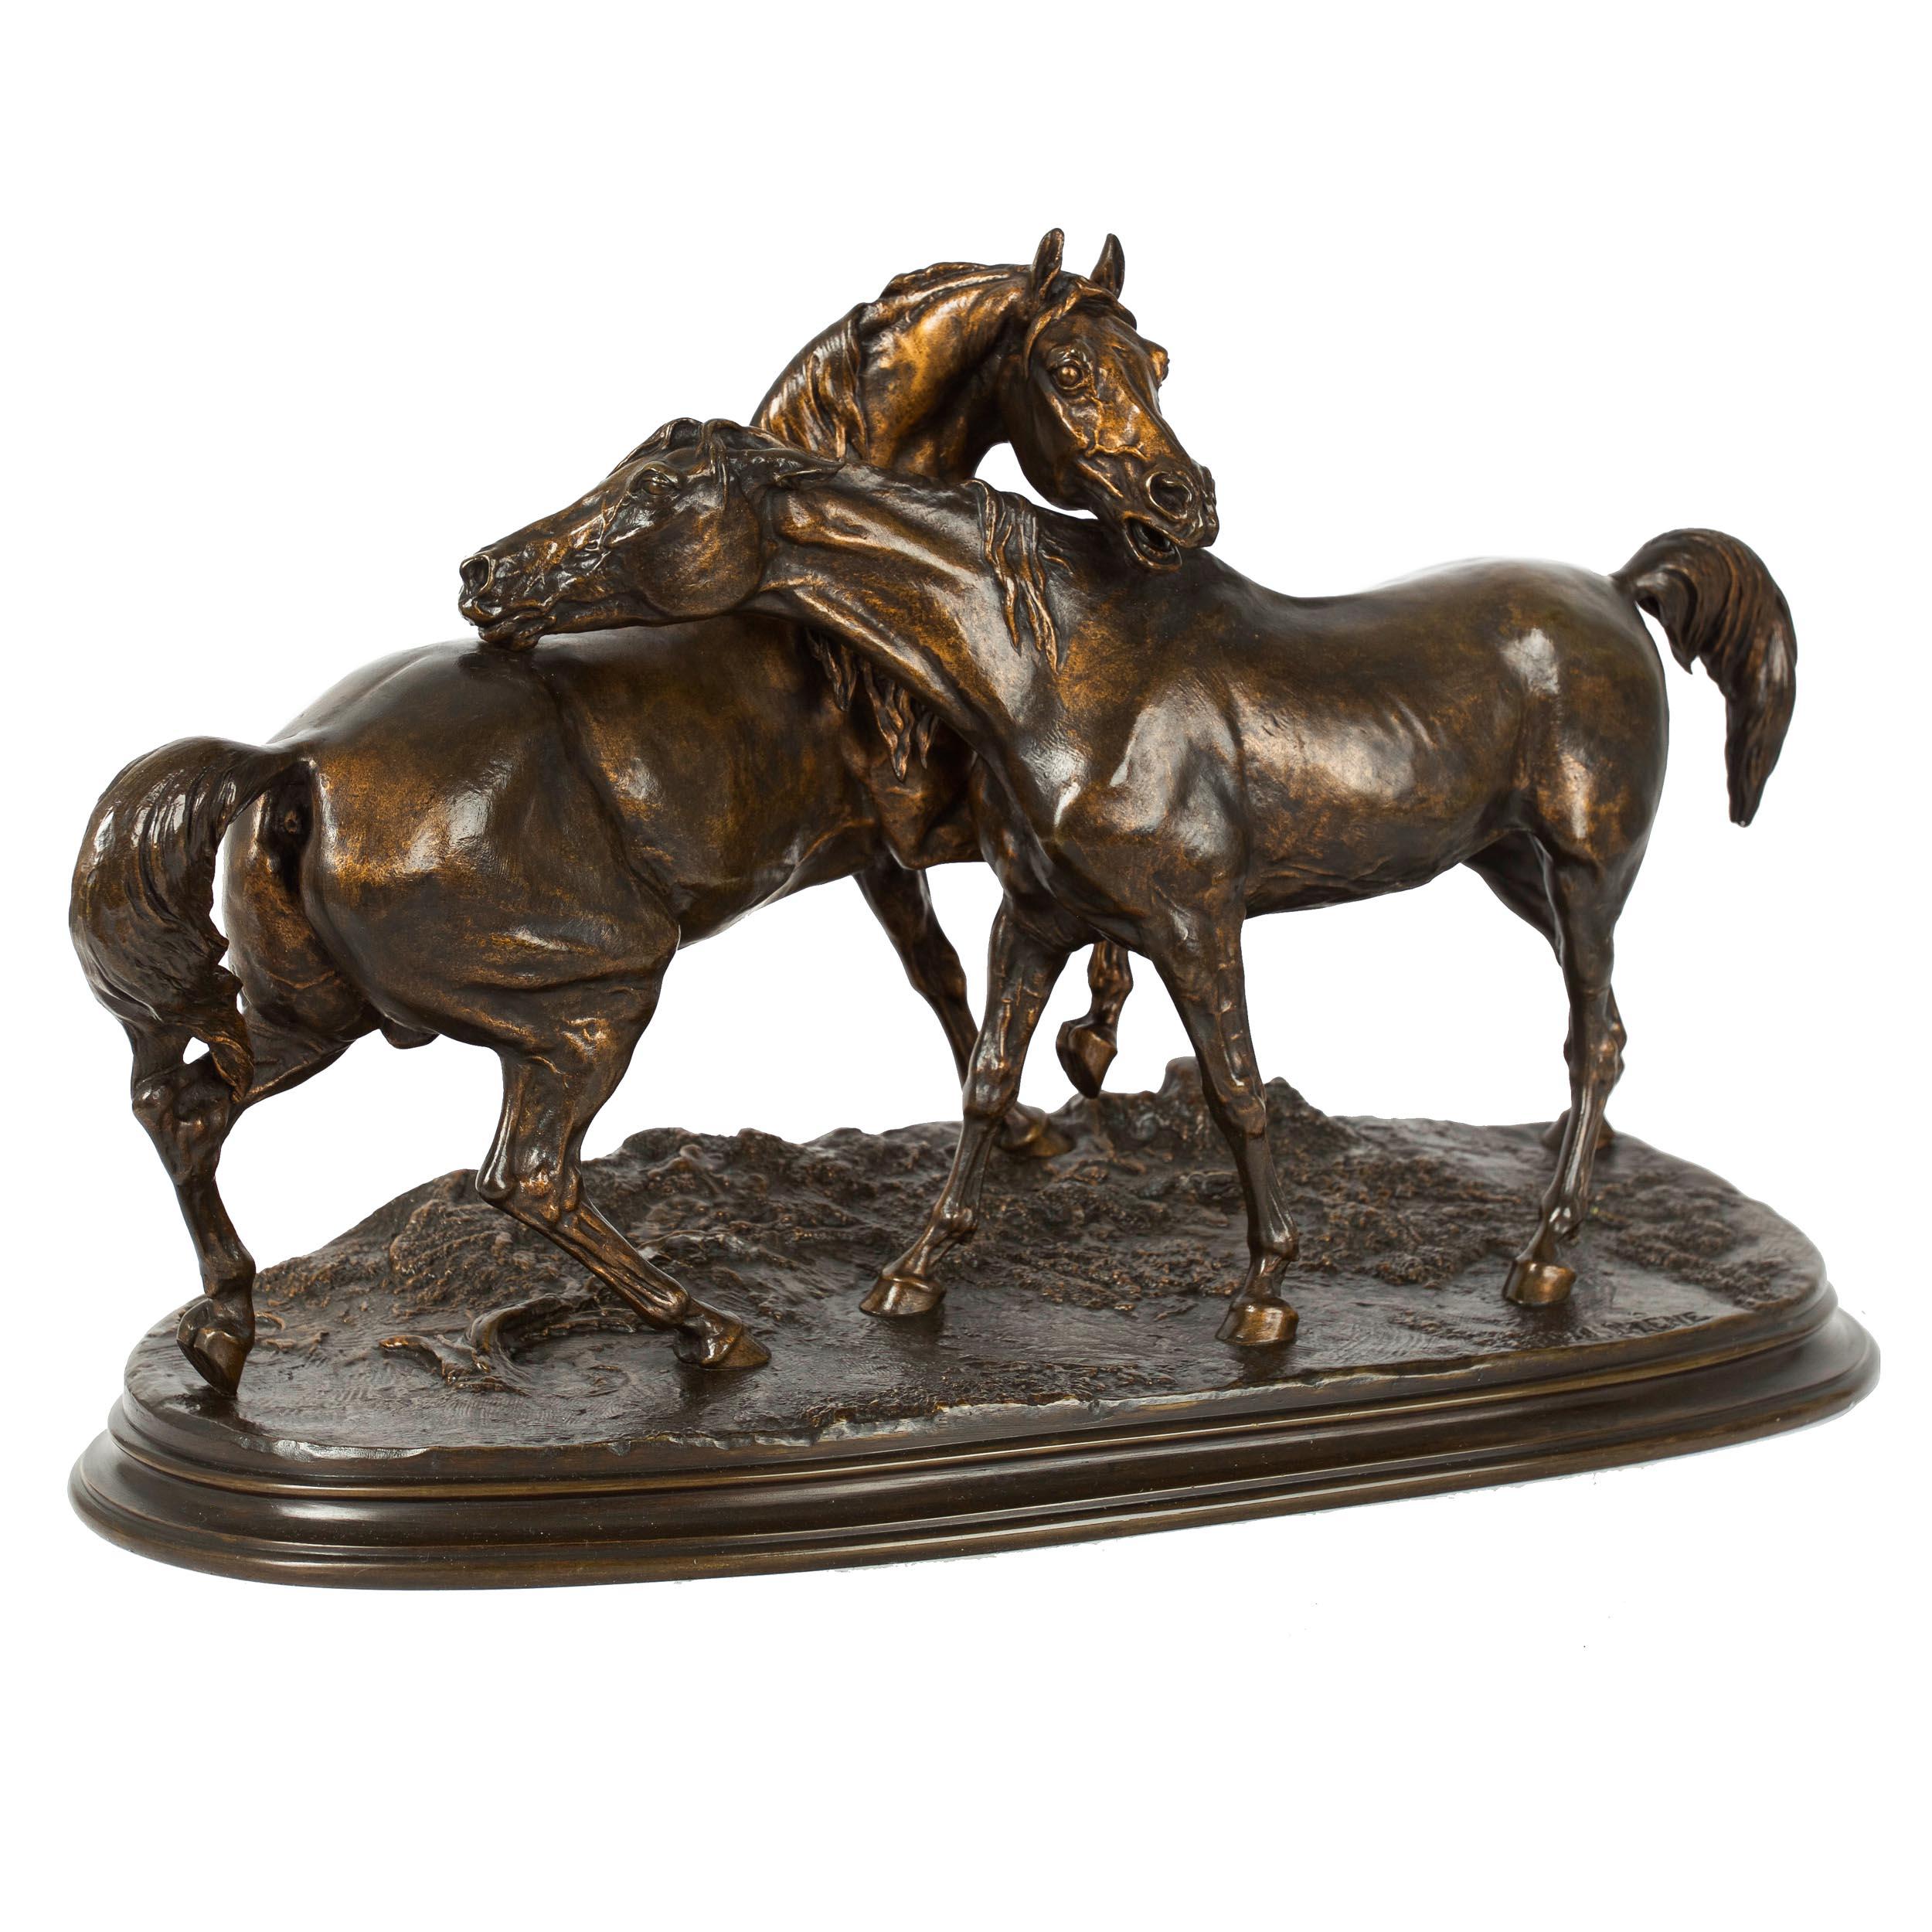 First exhibited at the 1852 Salon as no. 1479 as a sculpture in red wax with a thin black patina, it was originally titled Tachiani et Nedjébé, chevaux arabes and was later titled L'Accolade. It was exhibited as no. 1440 again in bronze in 1853 and